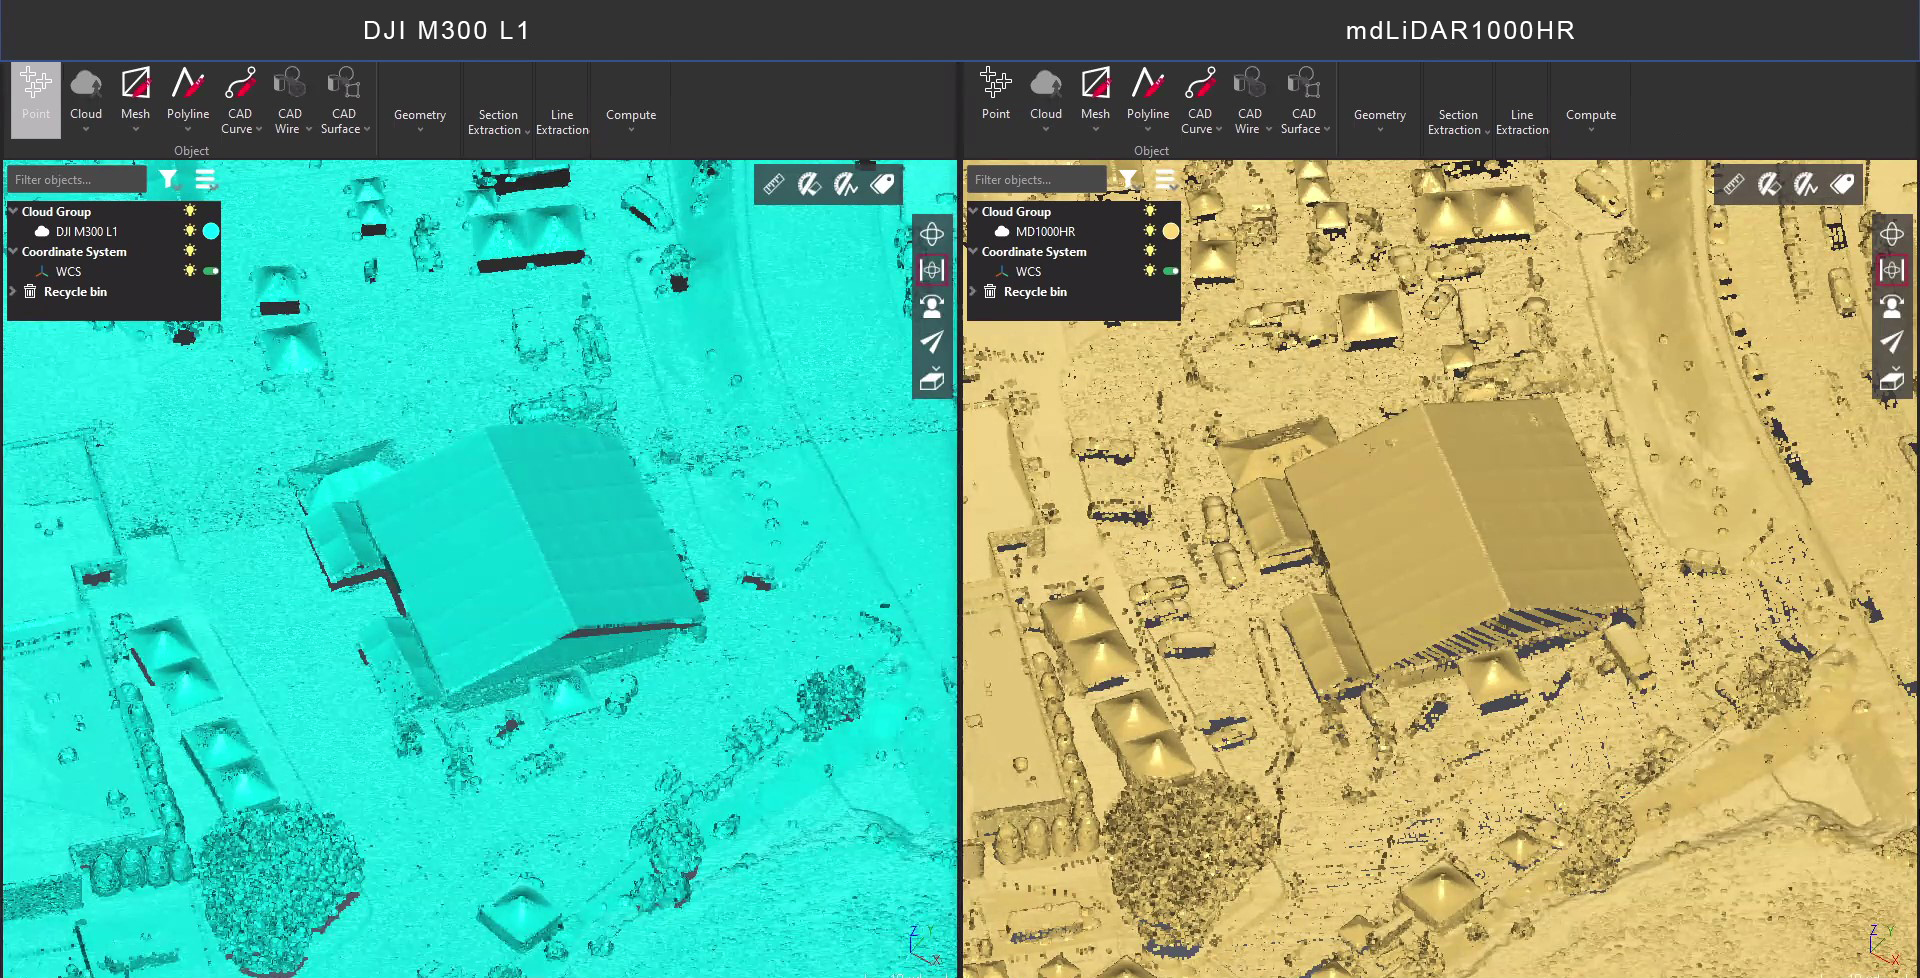 Comparing Drone LiDAR Data to the mdLiDAR1000HR